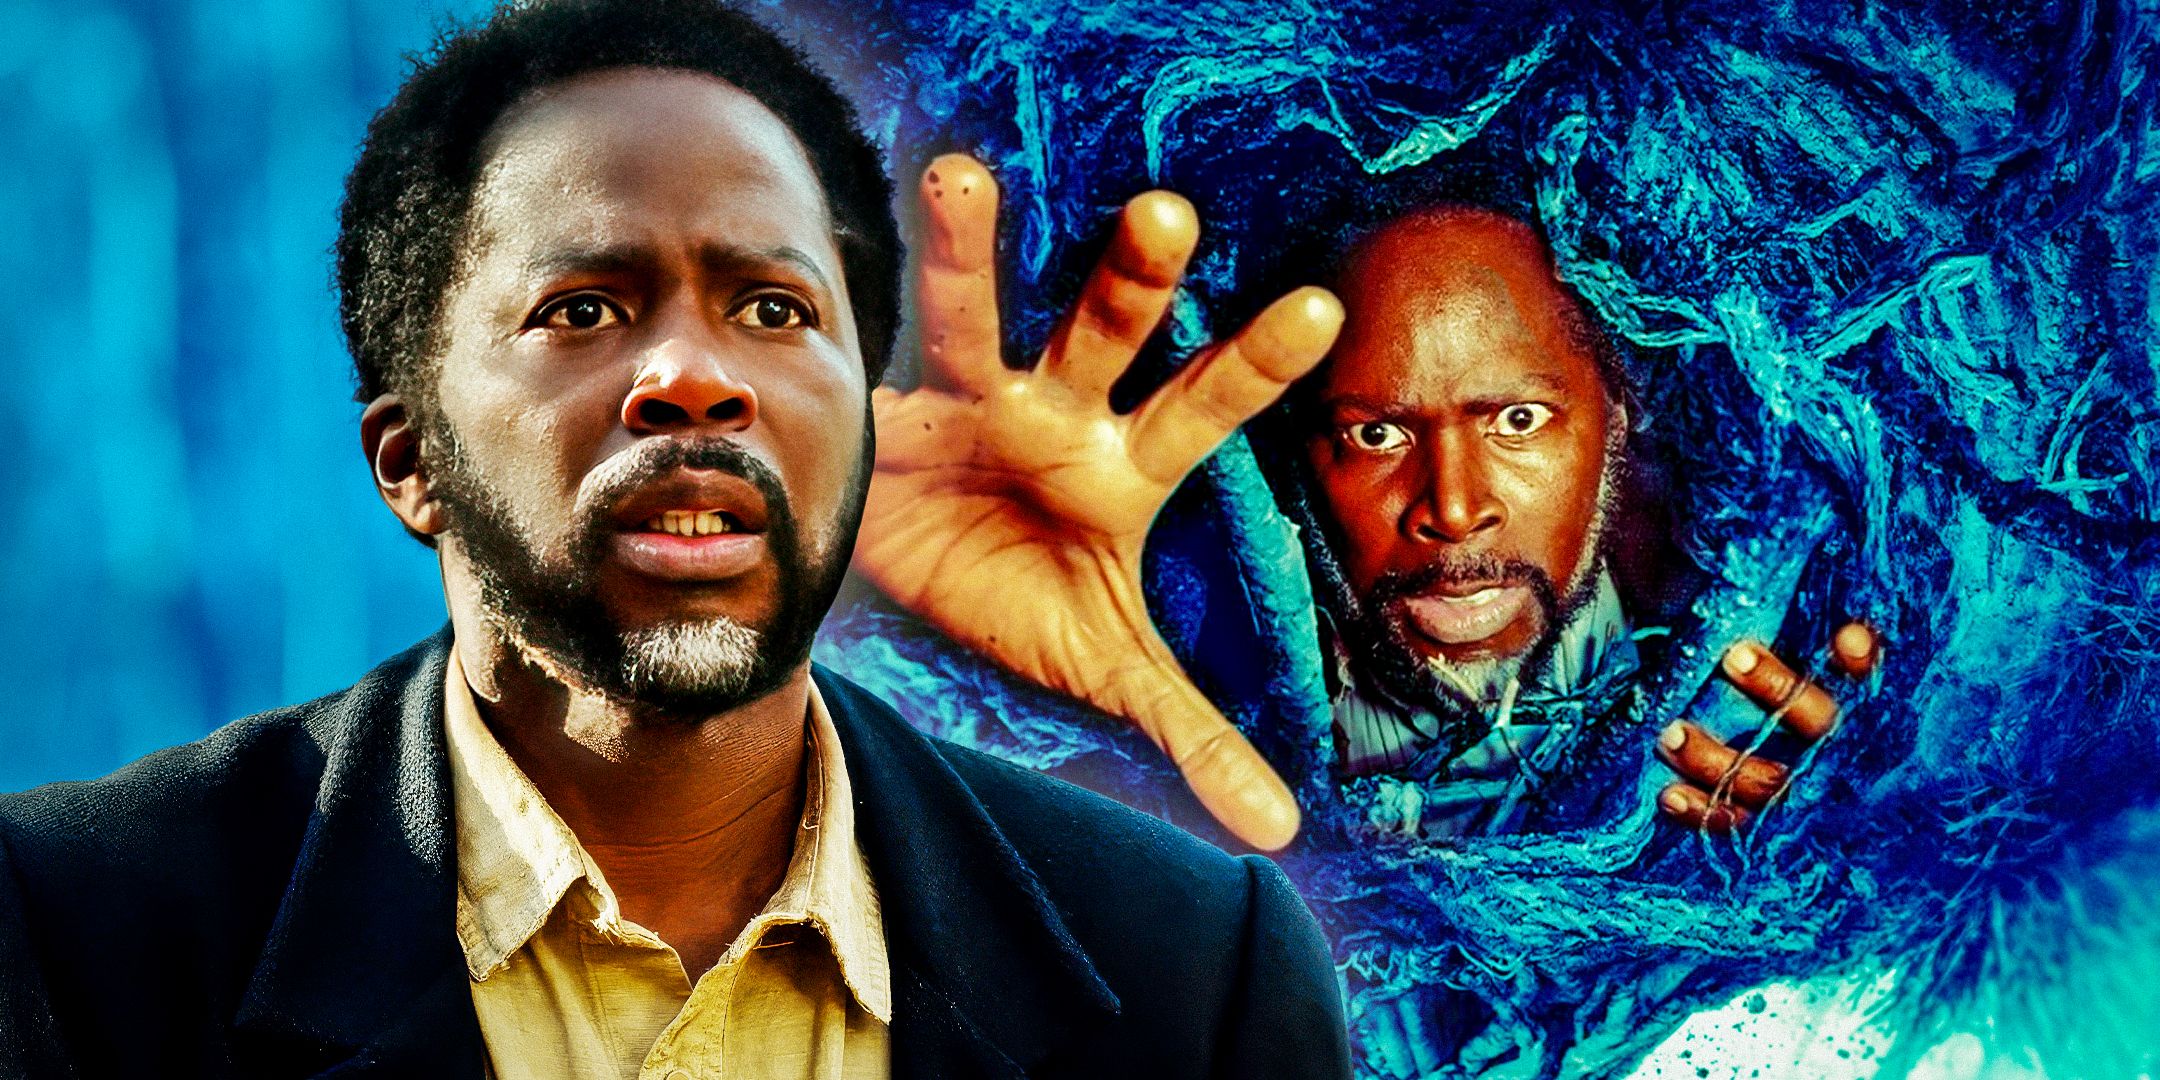 Harold Perrineau as Boyd Stevens looking shocked in From with Boyd being pulled into a void behind him